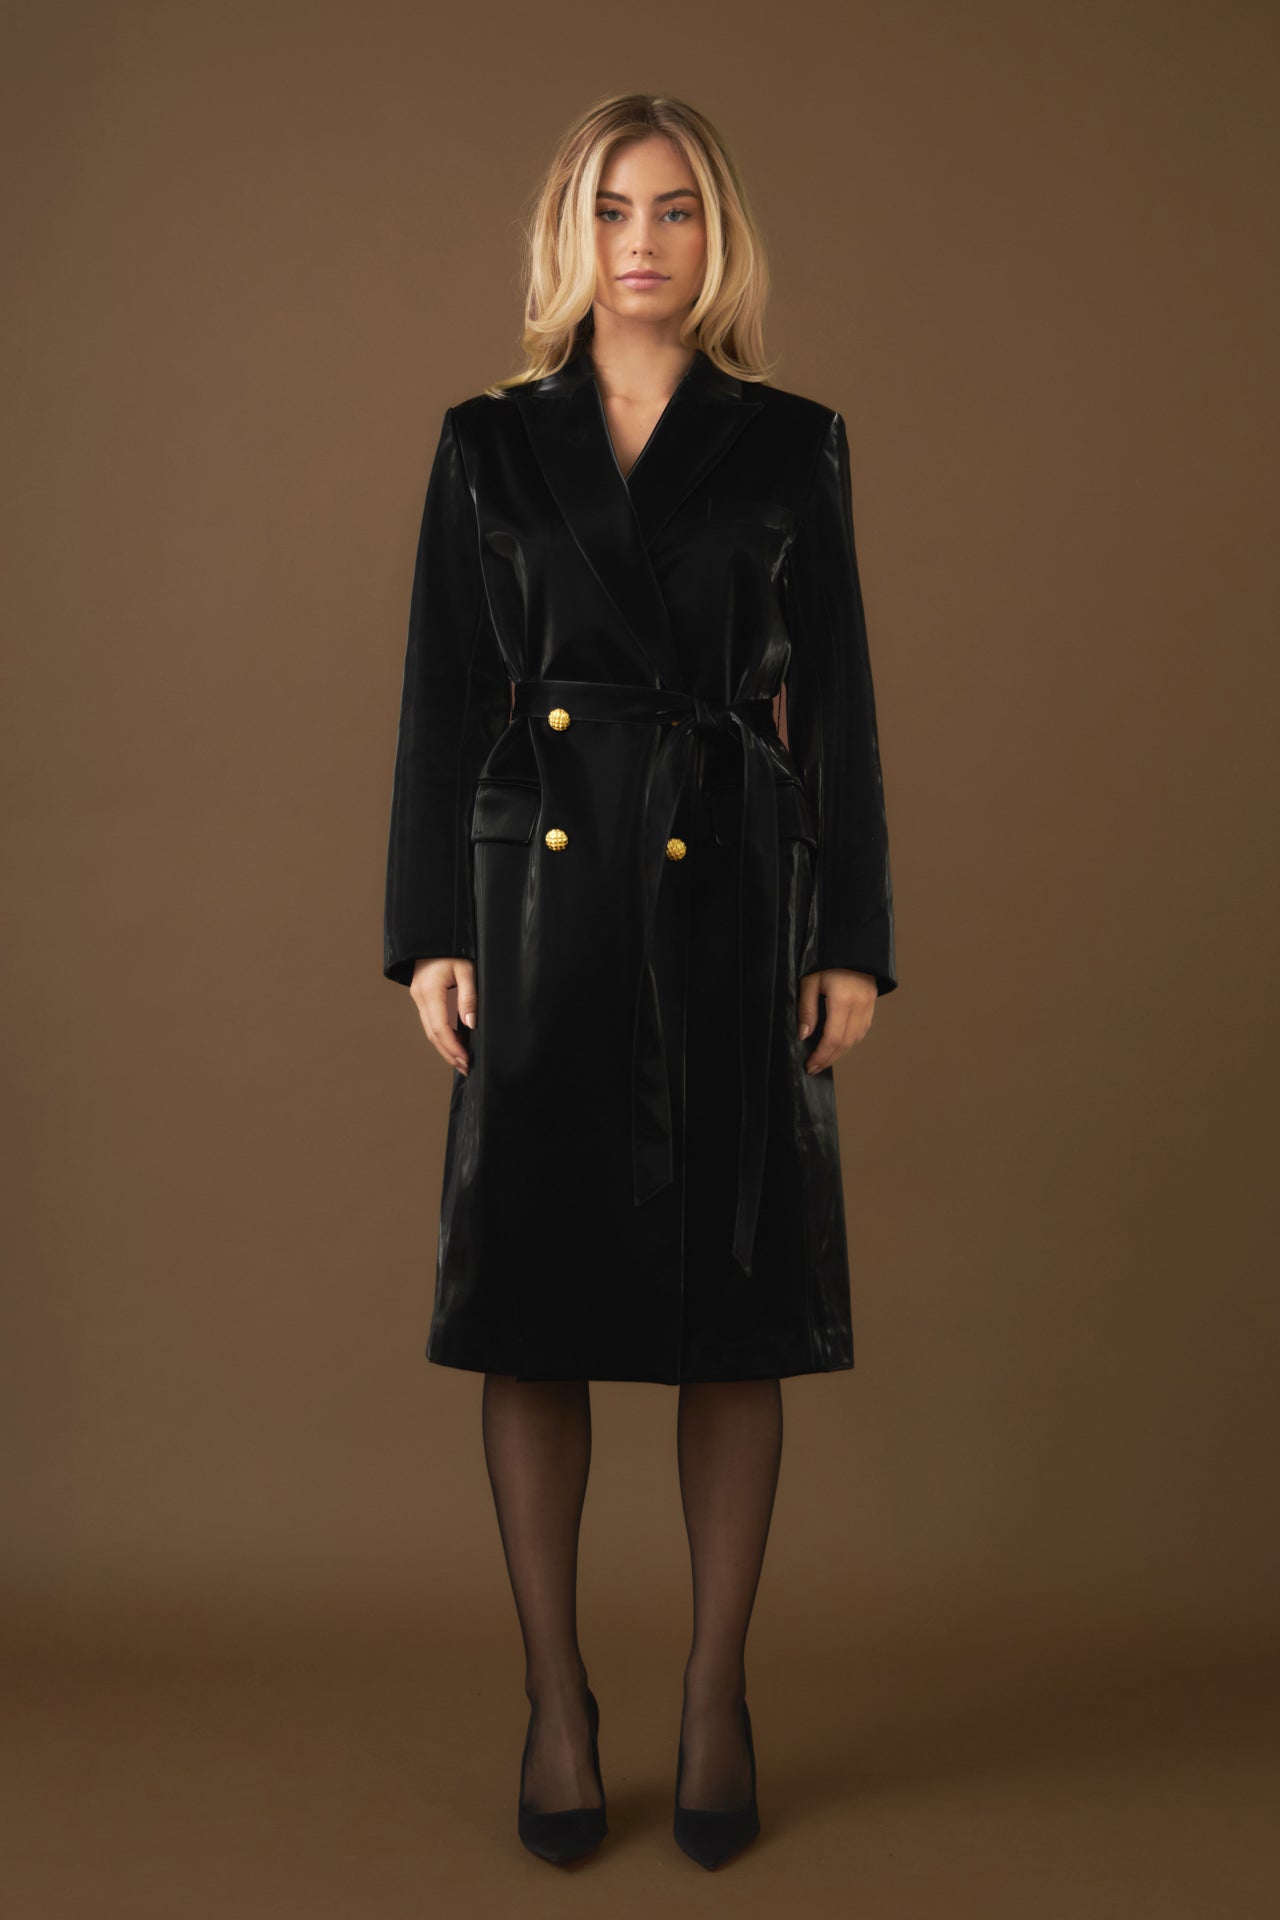 Endless Rose - Shiny Vegan Leather Trench Coat - Coats in Women's Clothing available at endlessrose.com